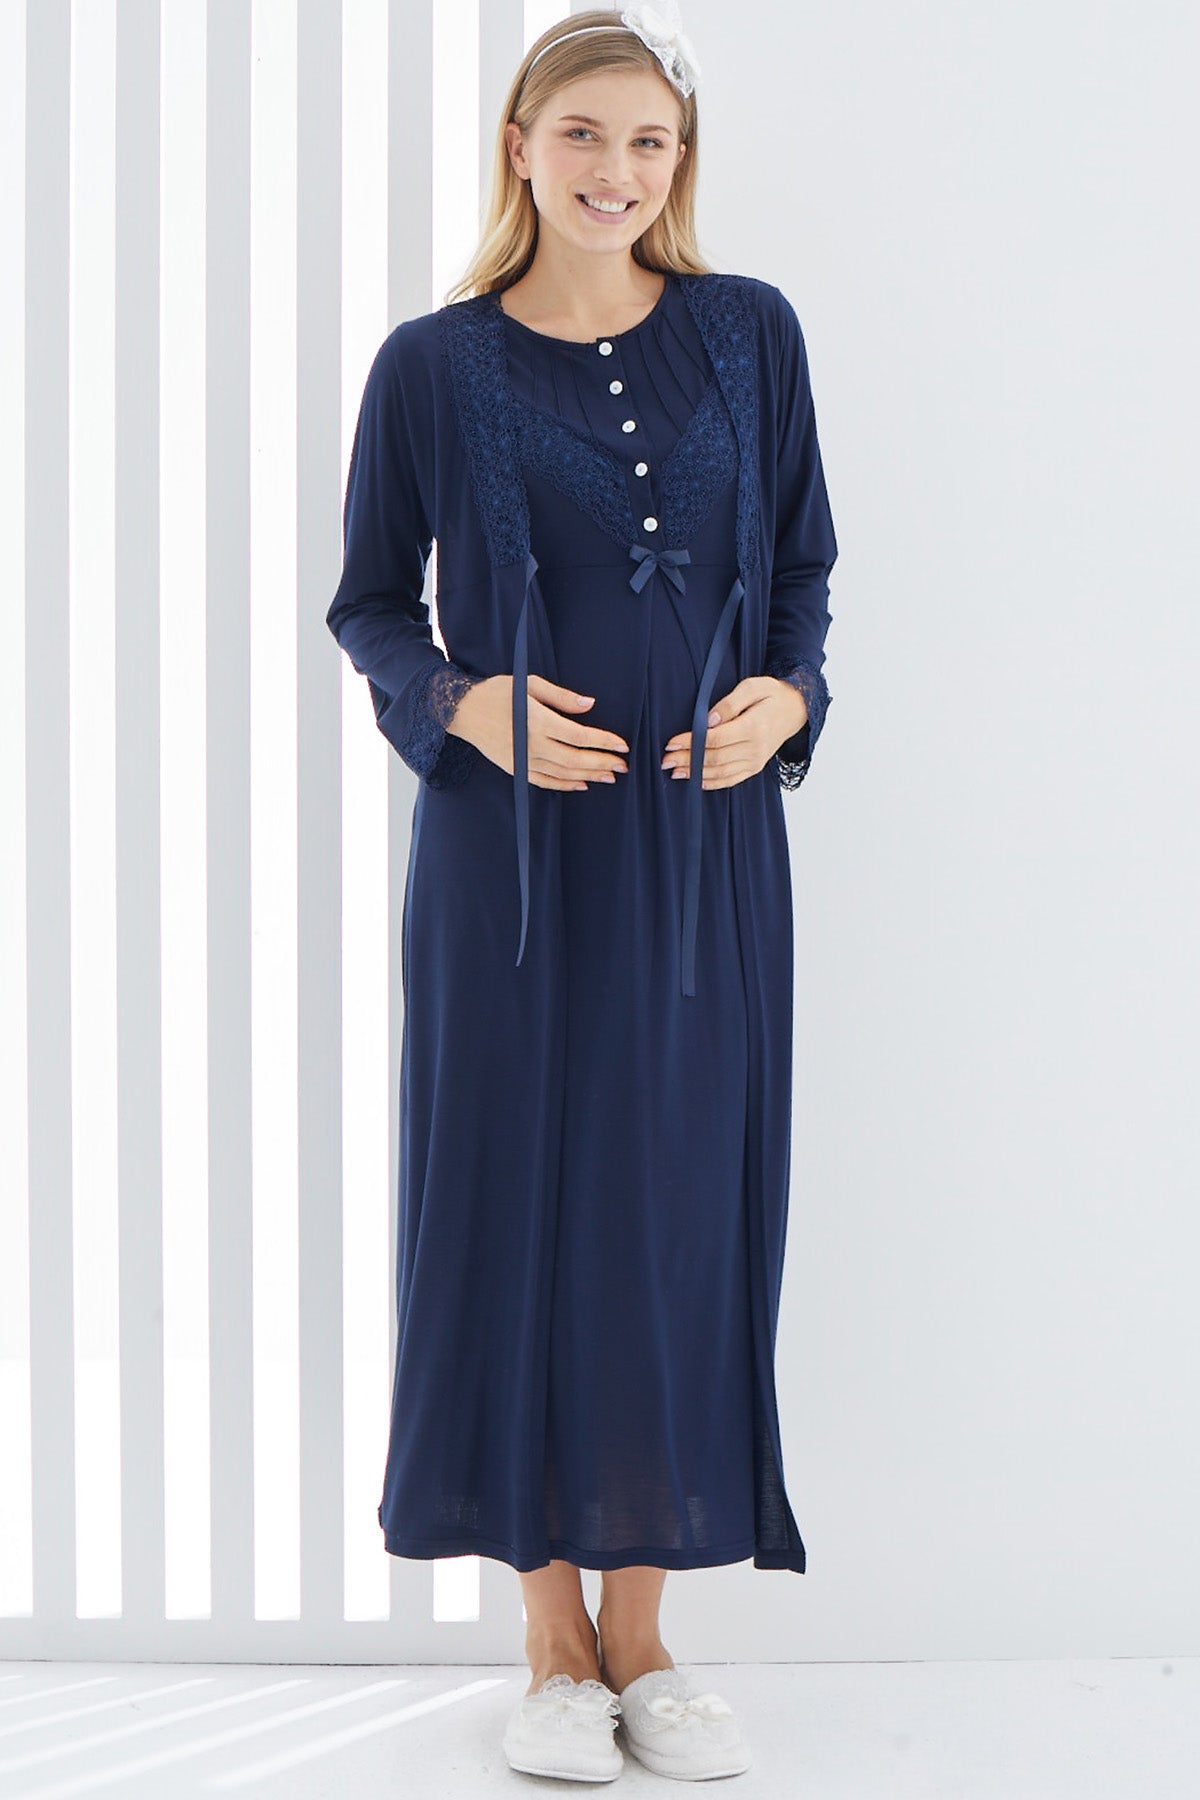 Shopymommy 2270 Lace Detailed Maternity & Nursing Nightgown With Robe Navy Blue